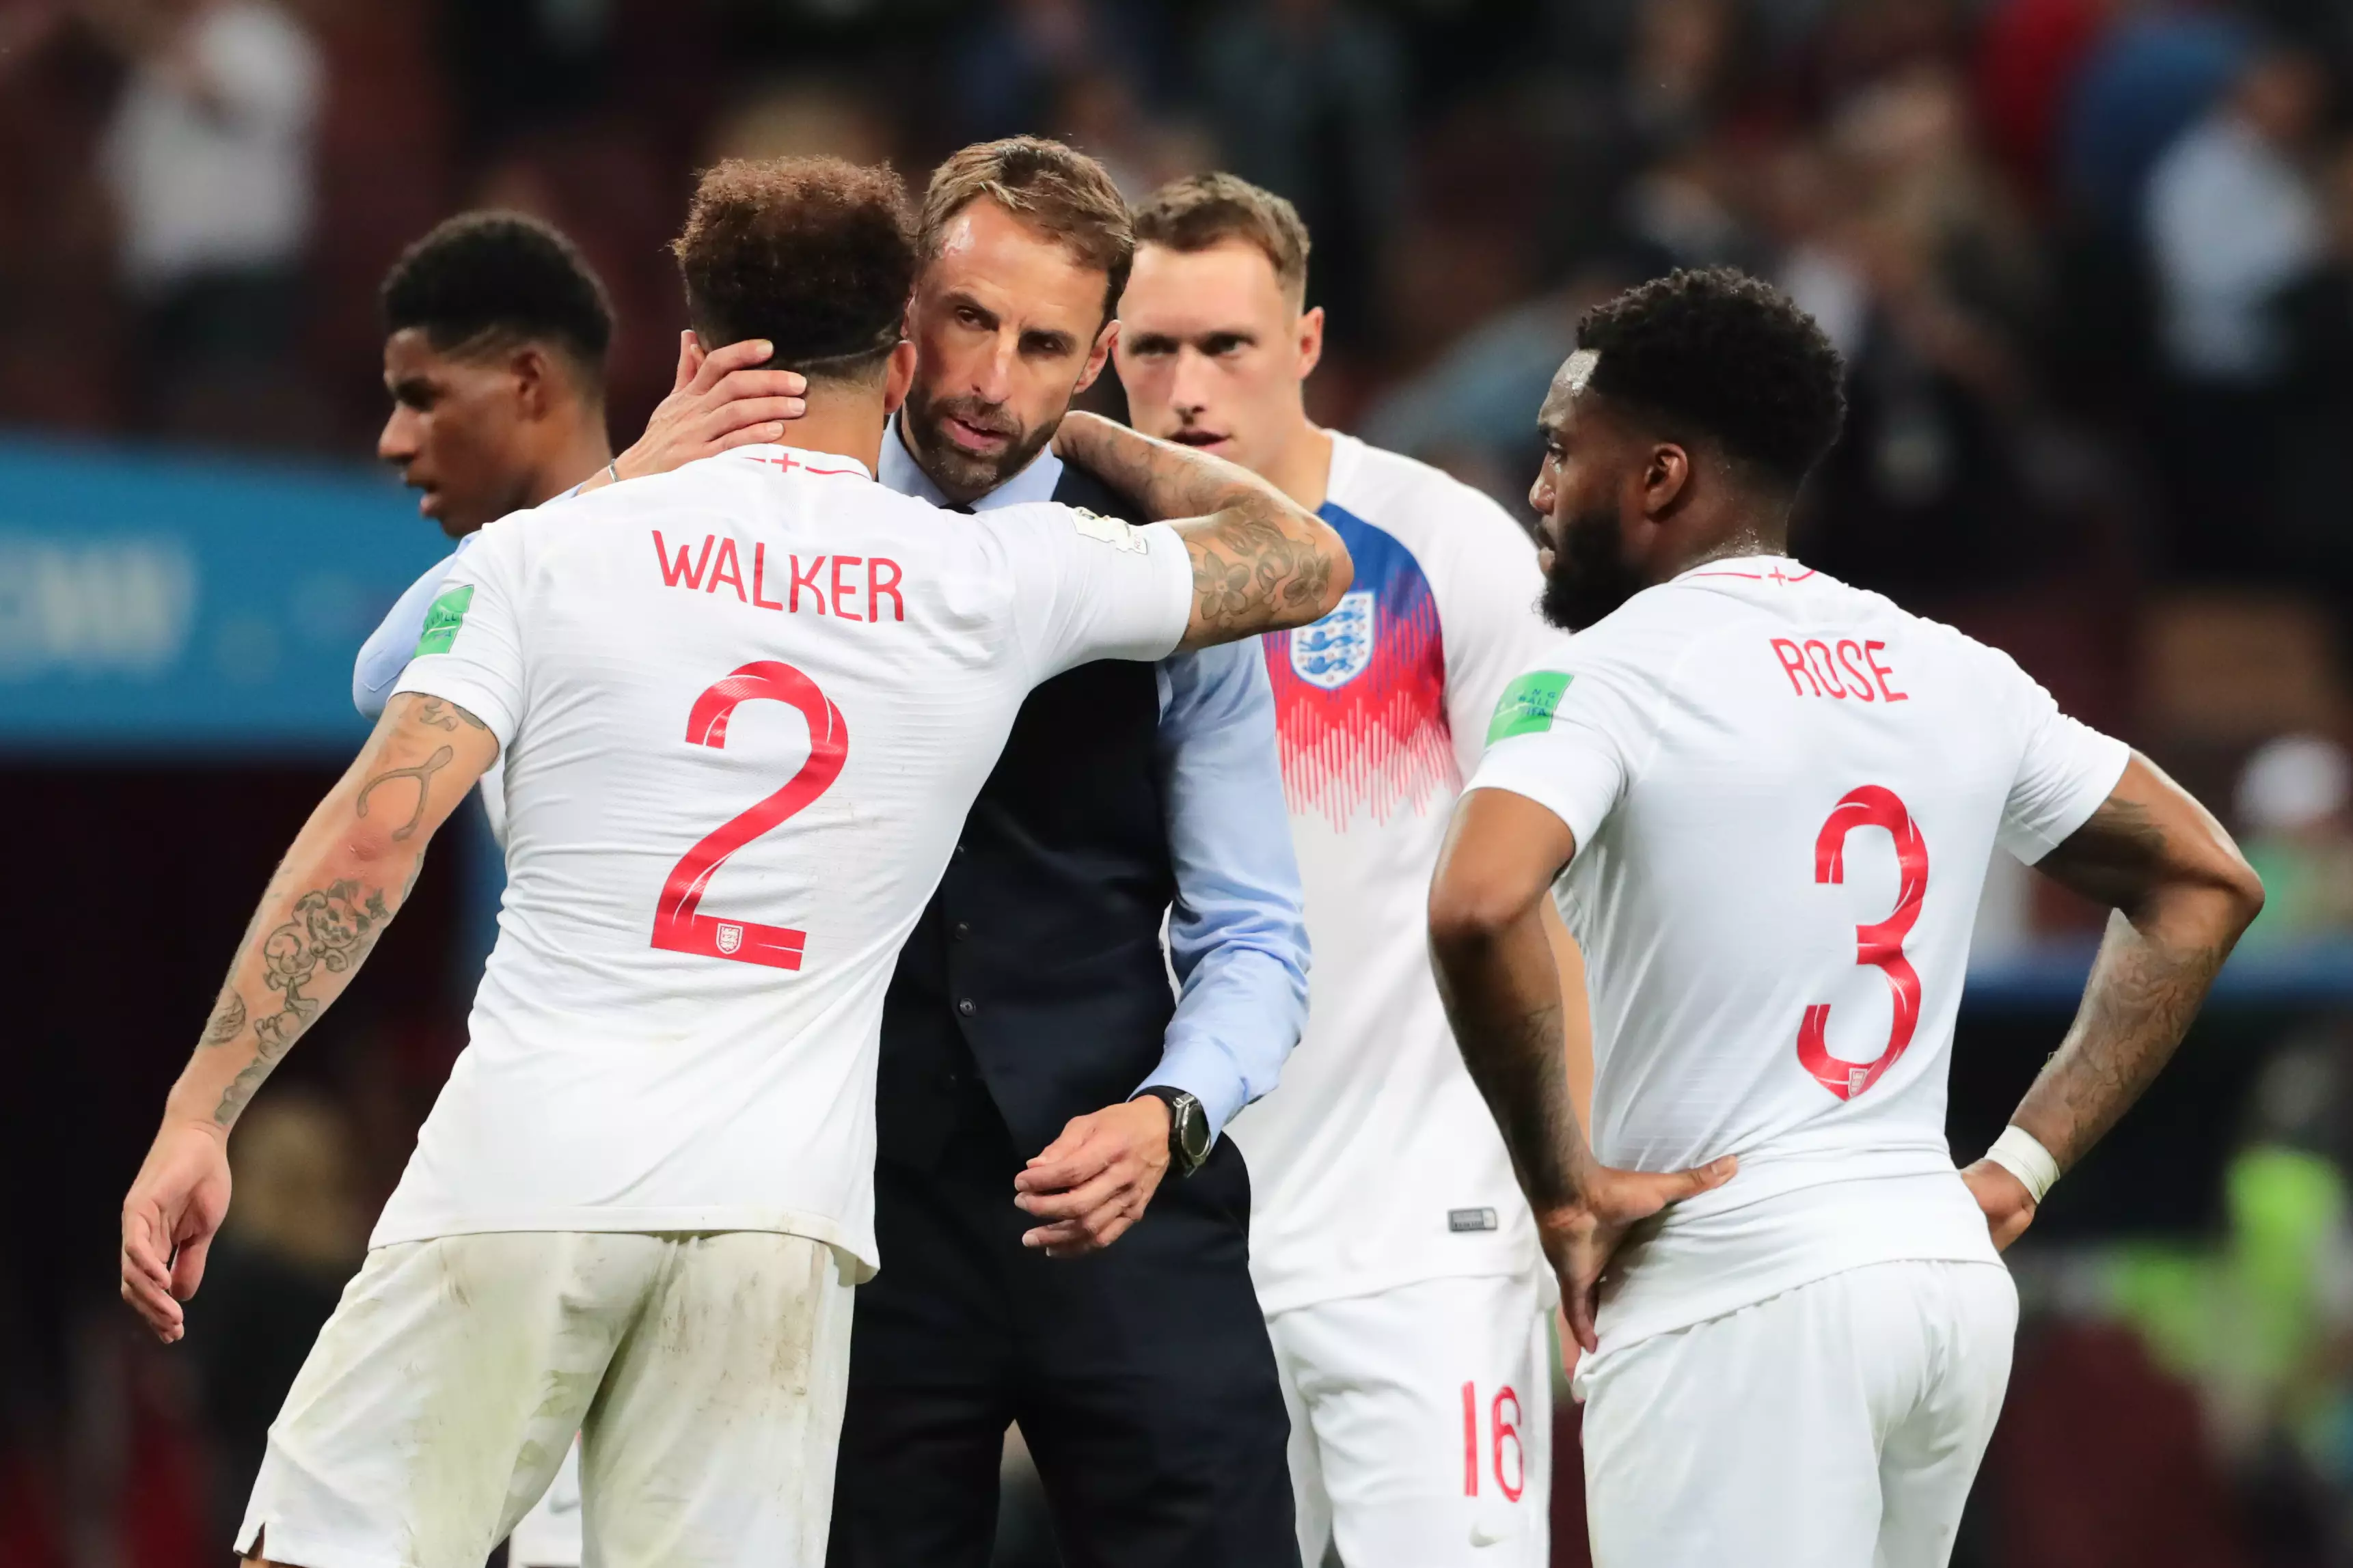 Southgate embraces with Walker. Image: PA